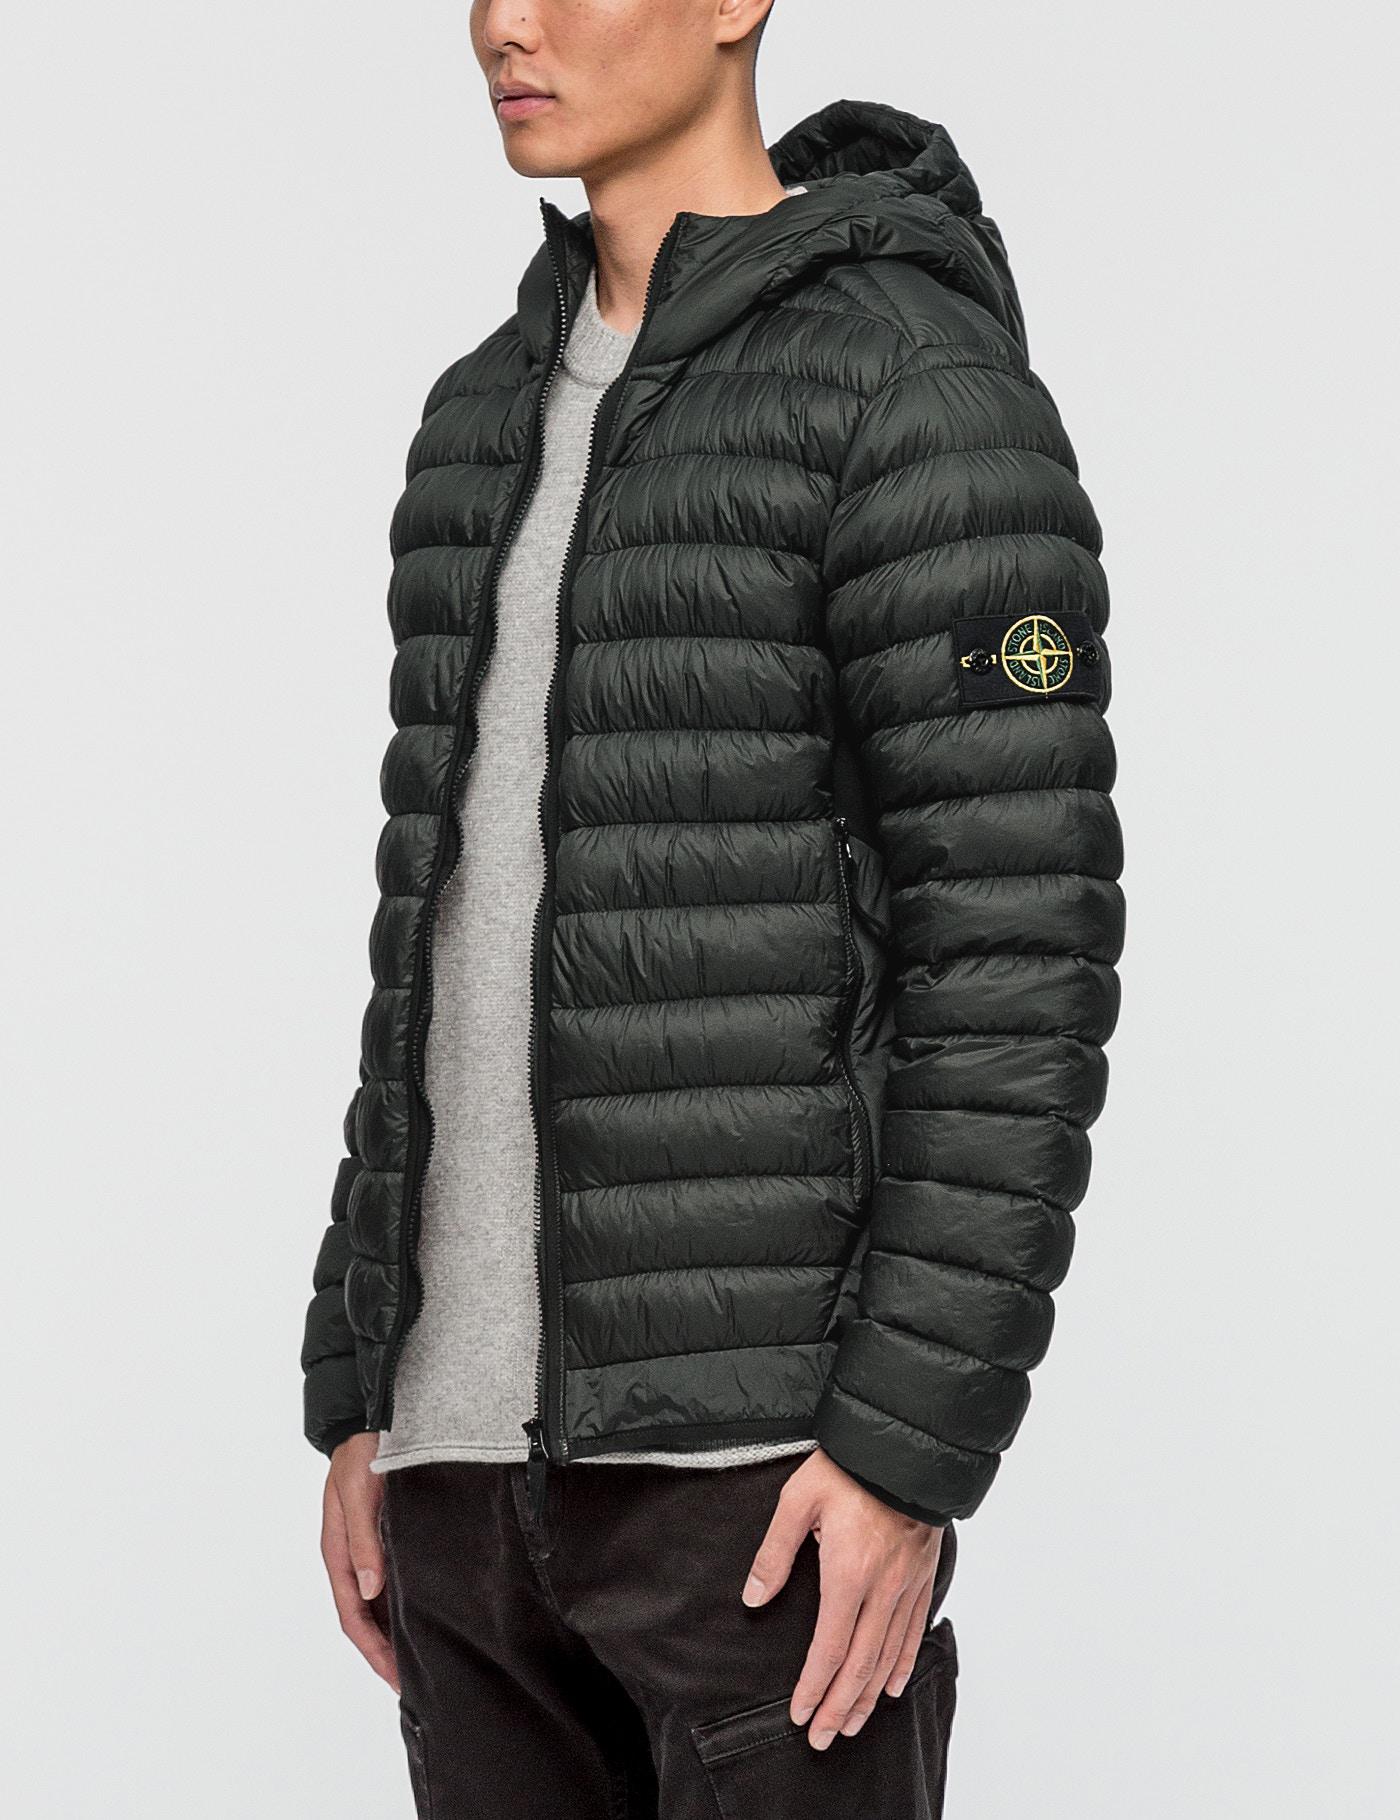 Stone Island Garment Dyed Micro Yarn Hooded Down Jacket in Black for Men -  Lyst